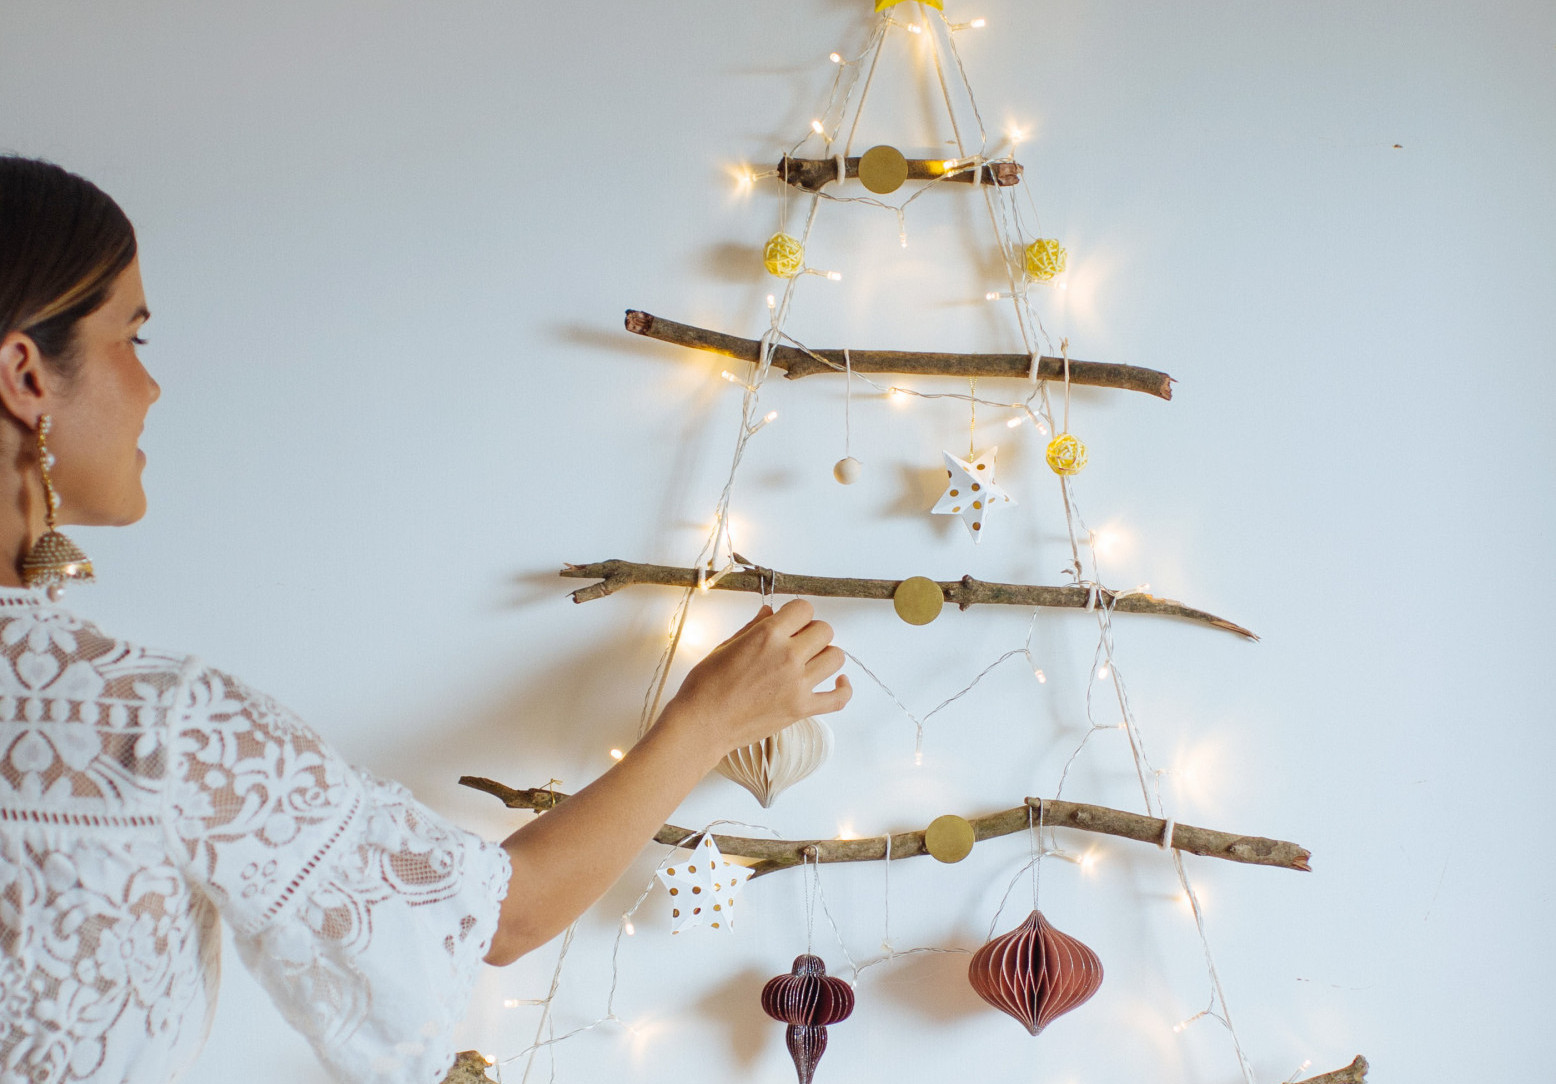 DIY projects using branches and twigs!